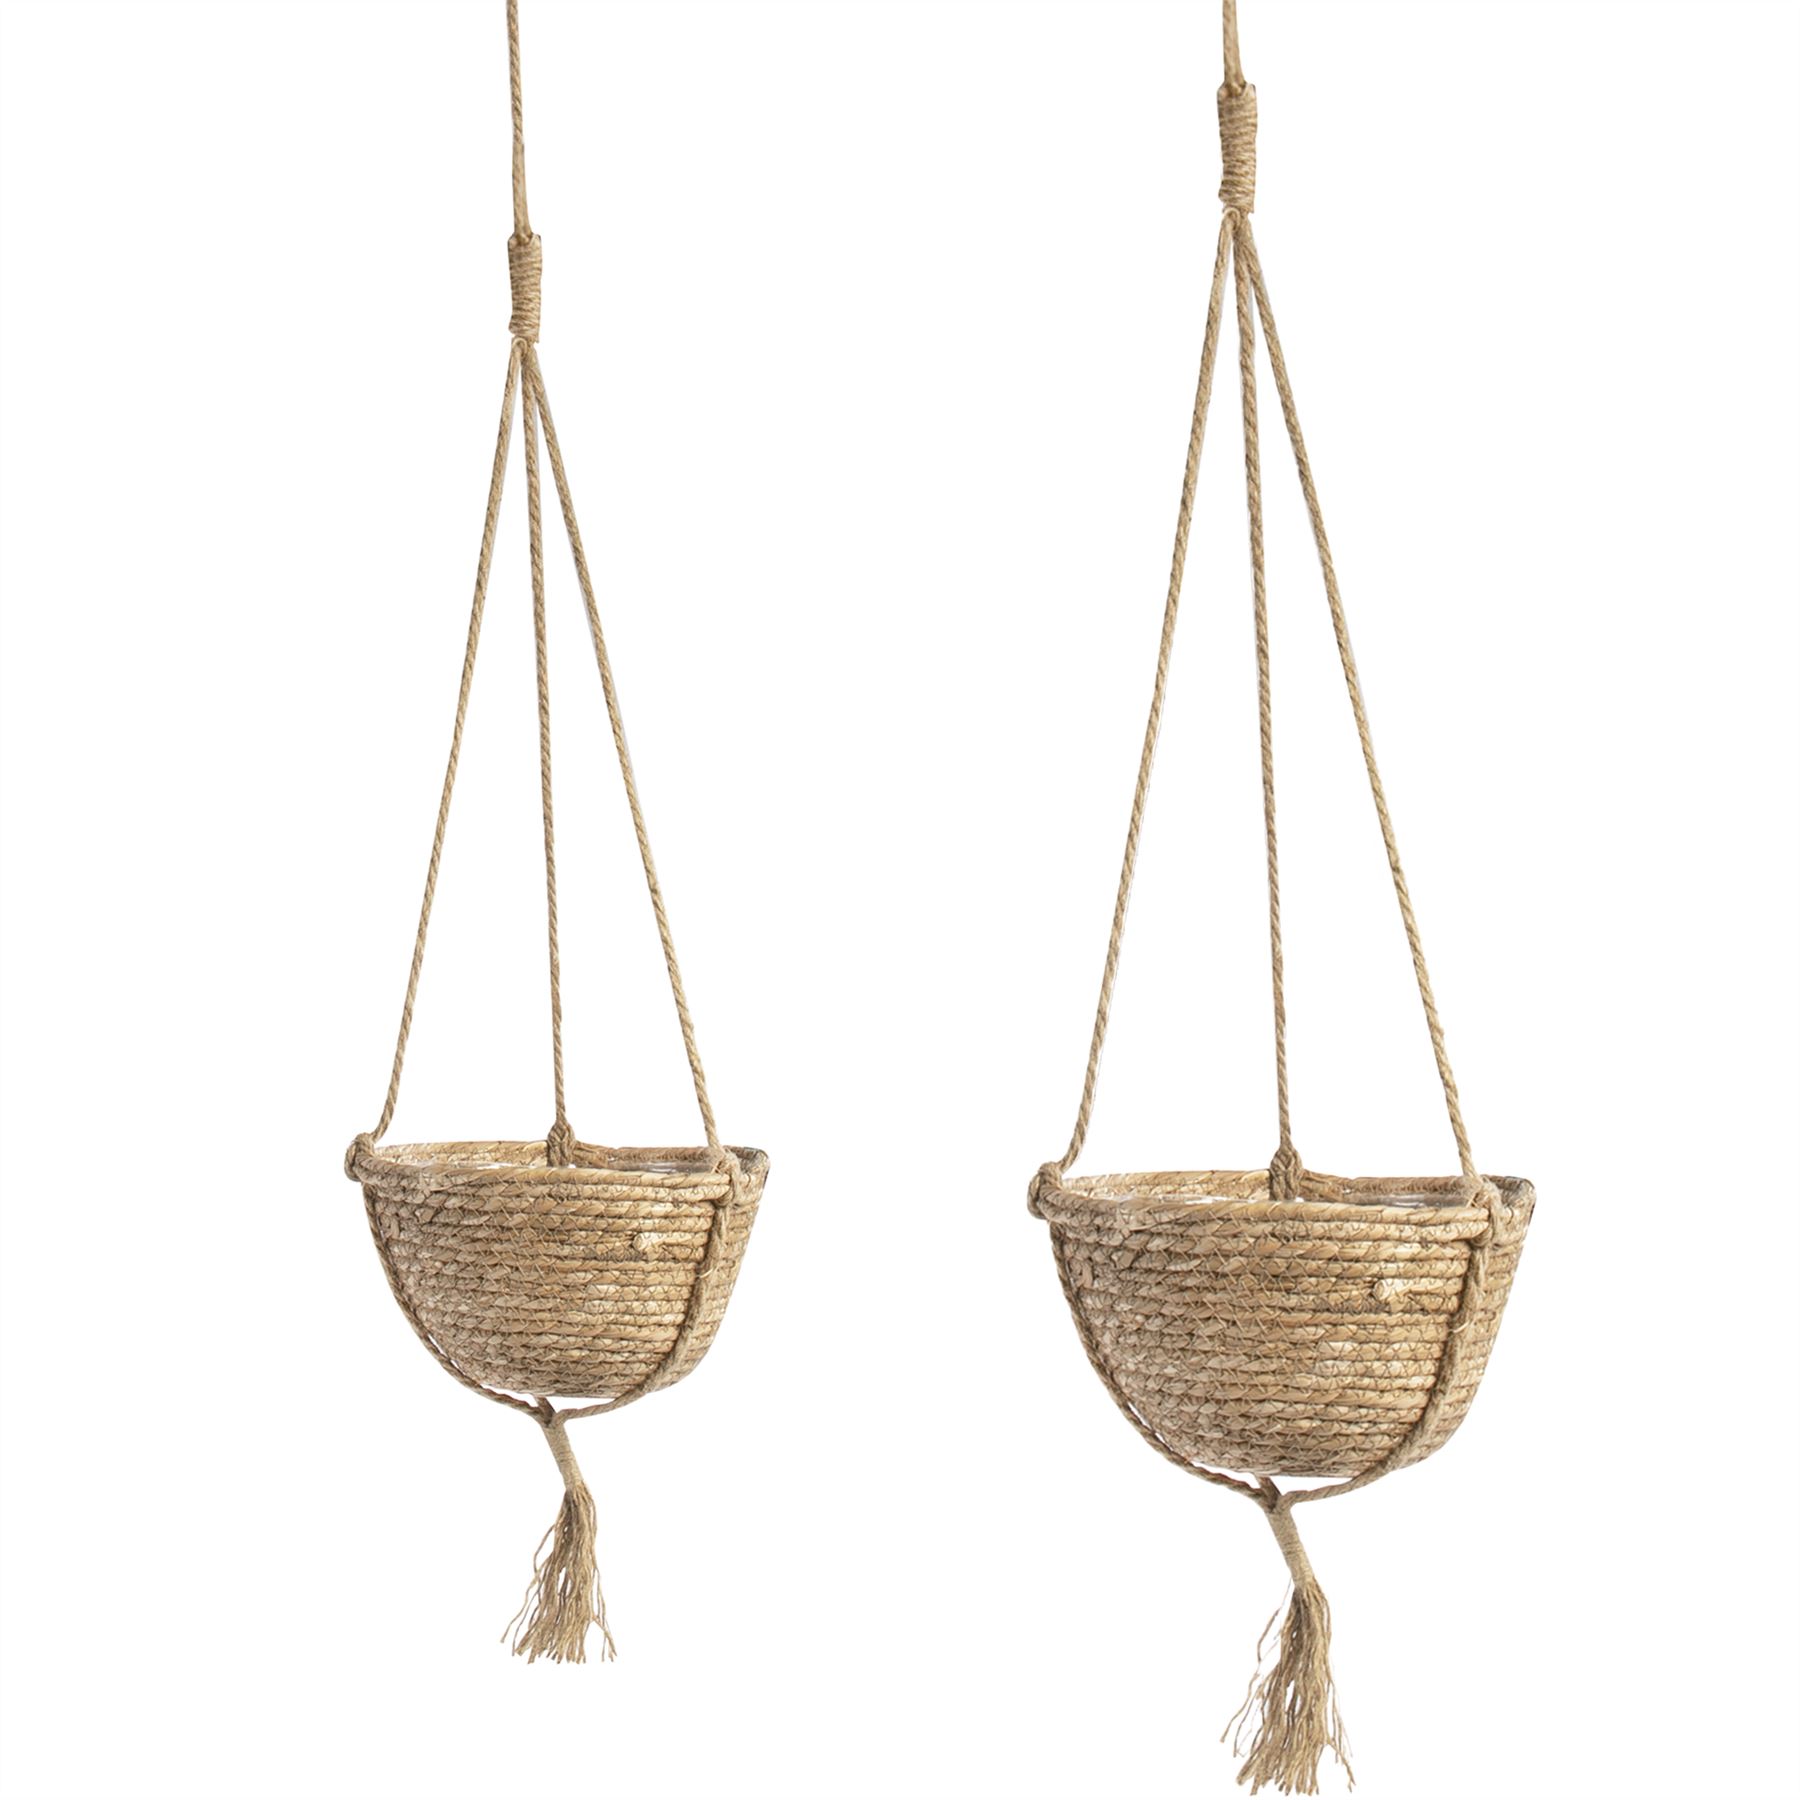 Hanging Seagrass Planter - Set of 2 | M&W